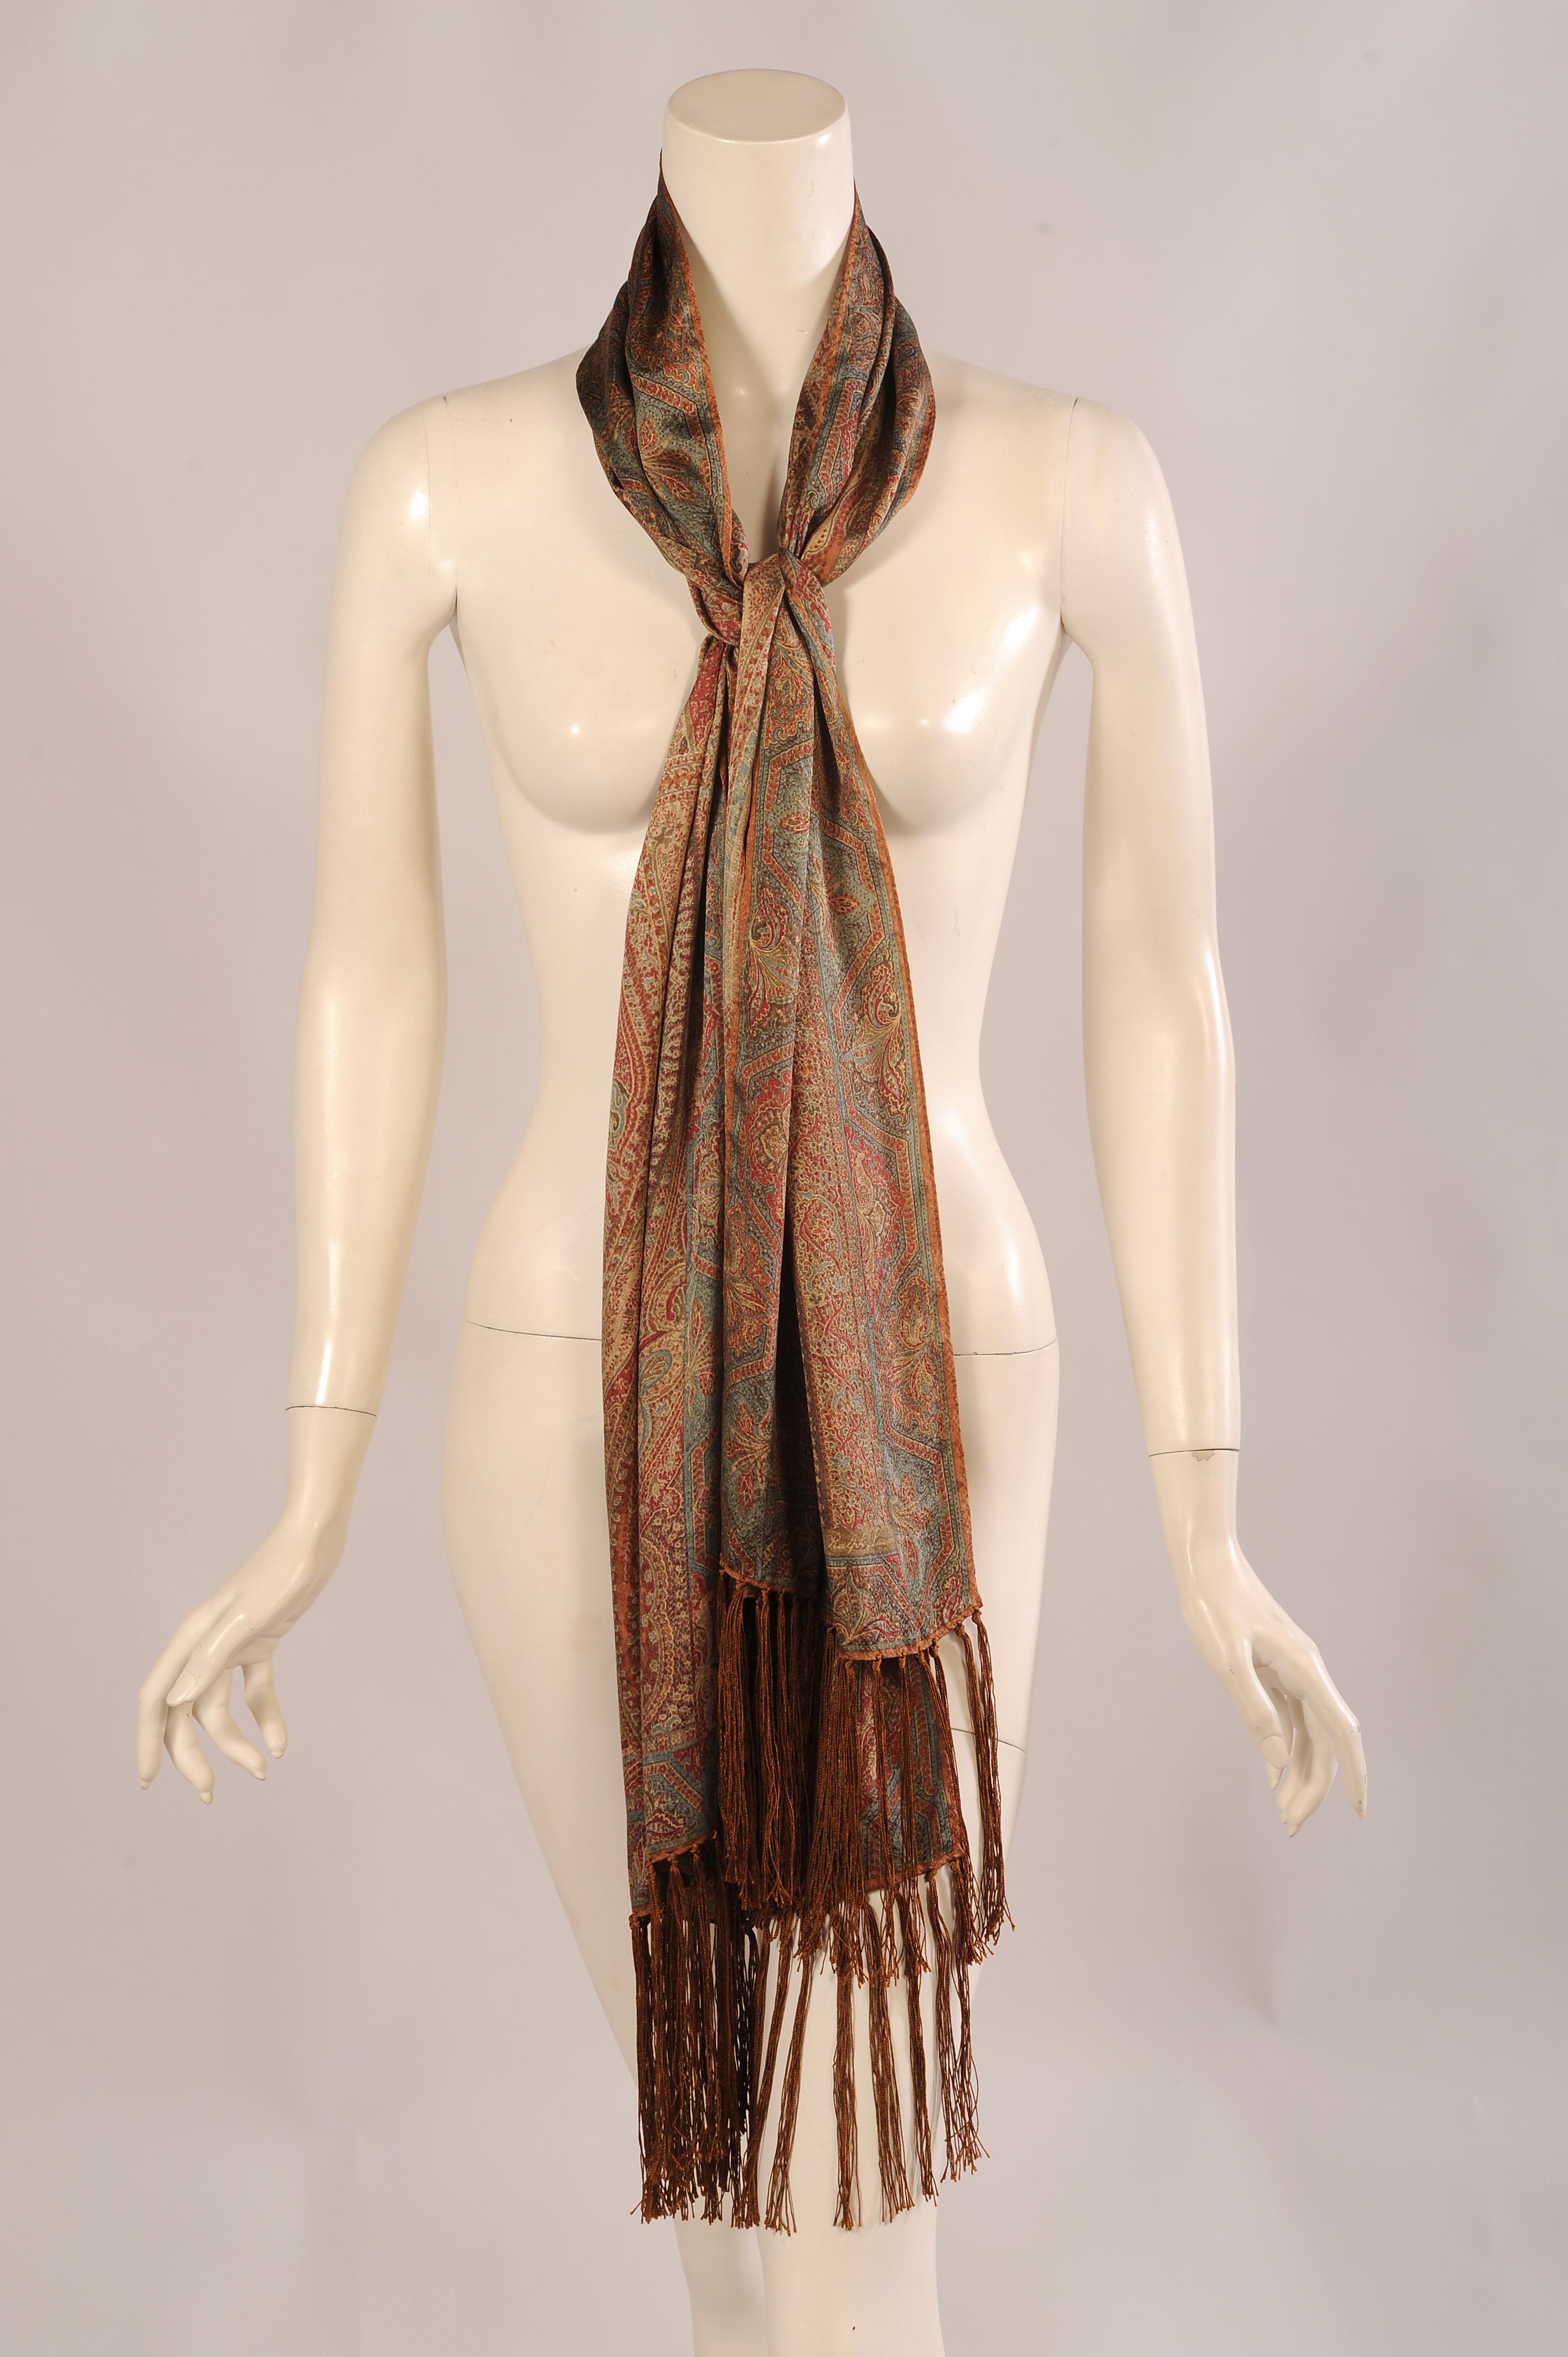 Brown Ralph Lauren Collection Silk Paisley Shawl with Fringe in Original Box